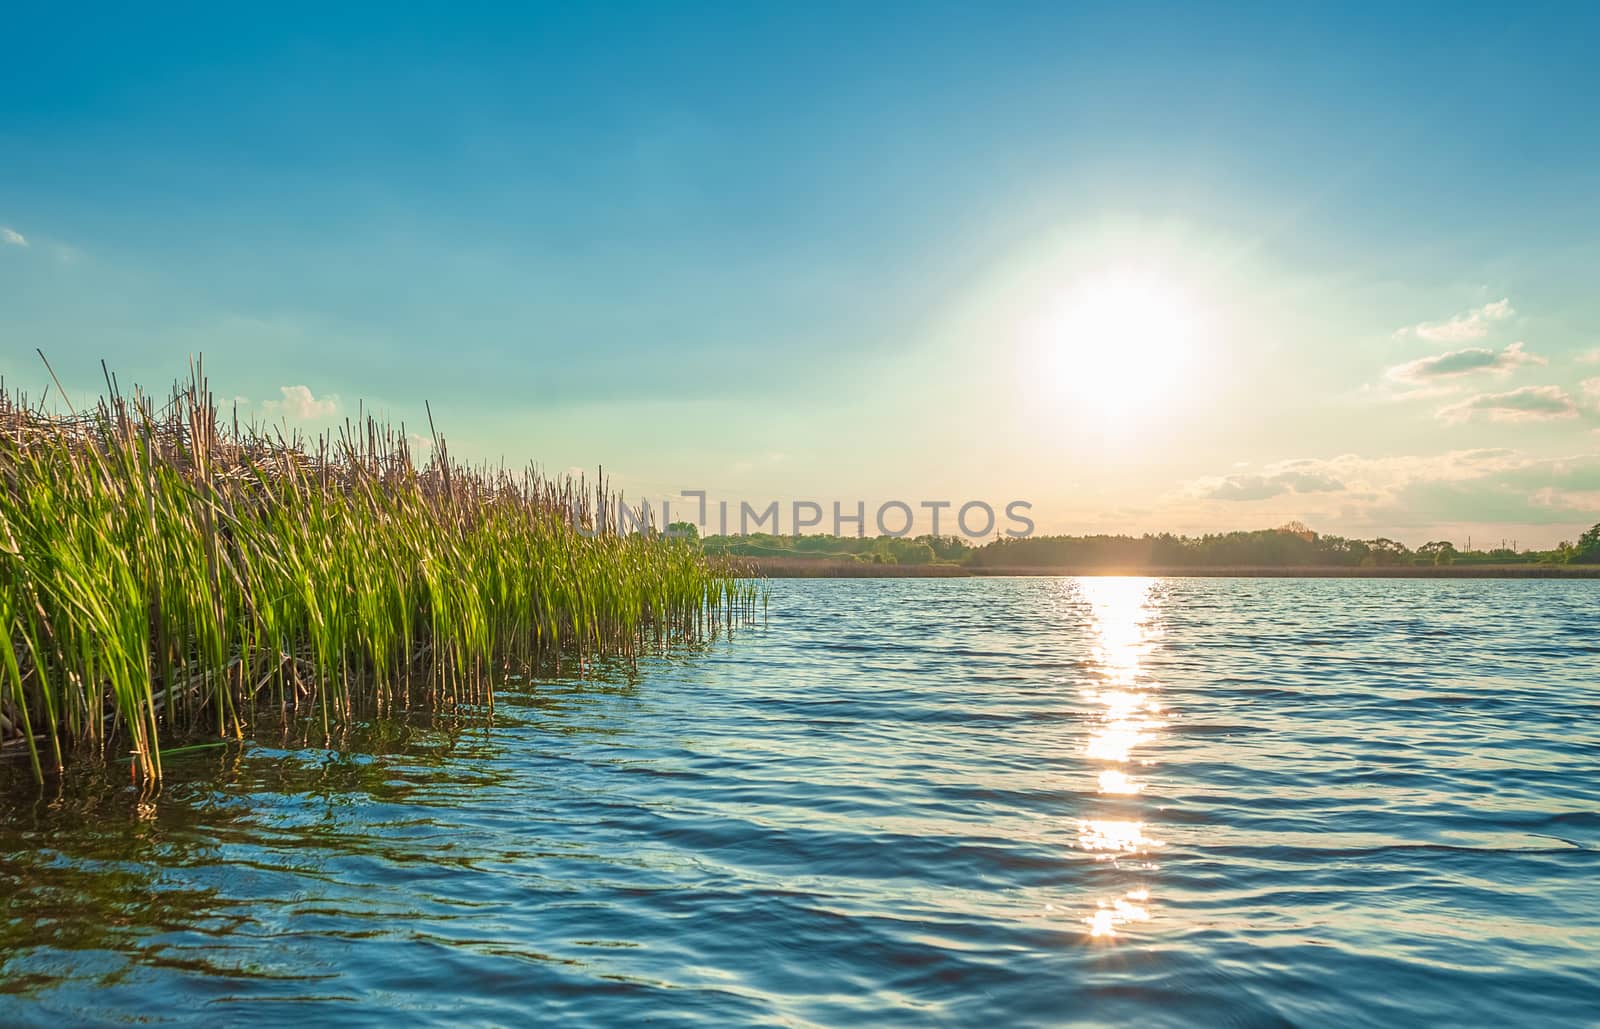 landscape view of the beautiful Kamenka river with thicket of reeds in the Zhytomyr region of Ukraine